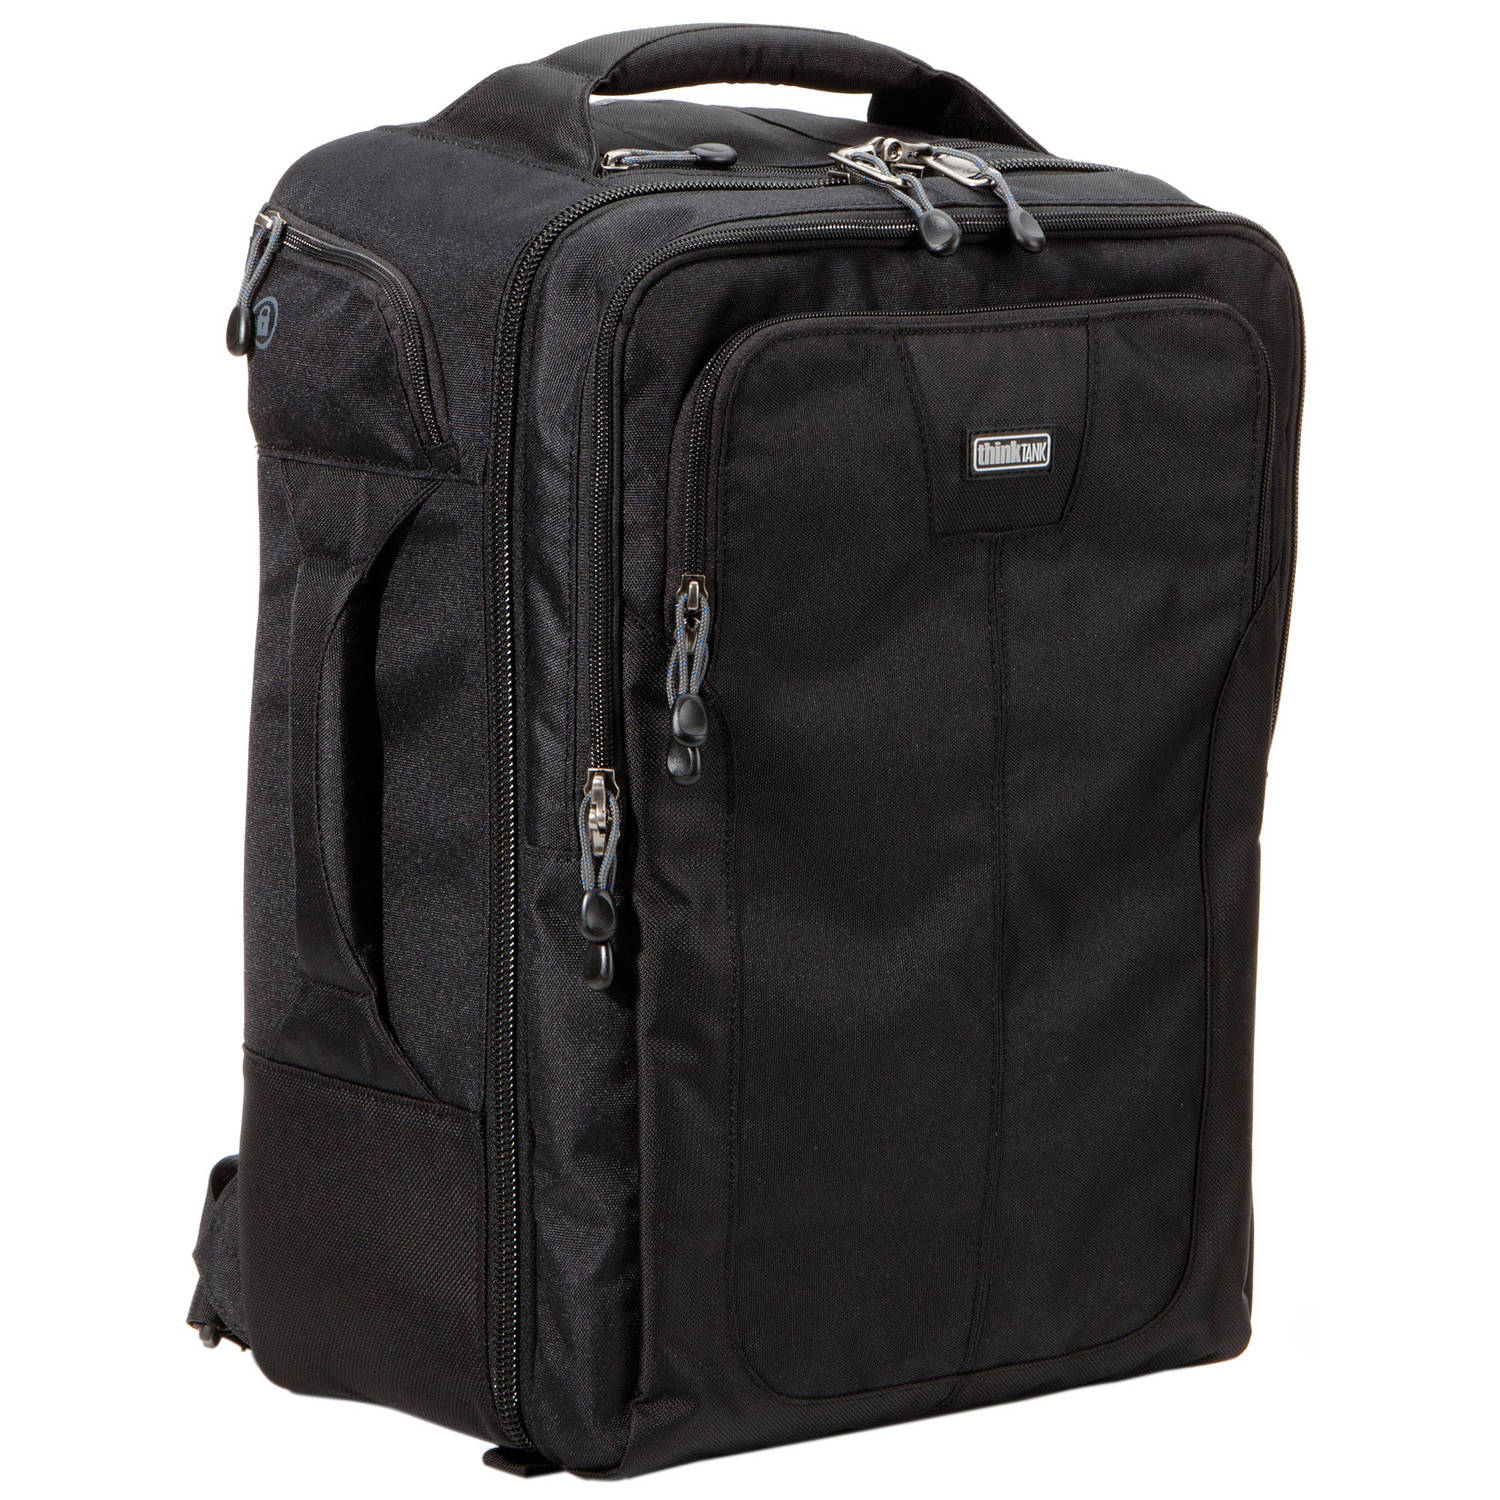 Think Tank Airport Commuter Backpack  (Black)